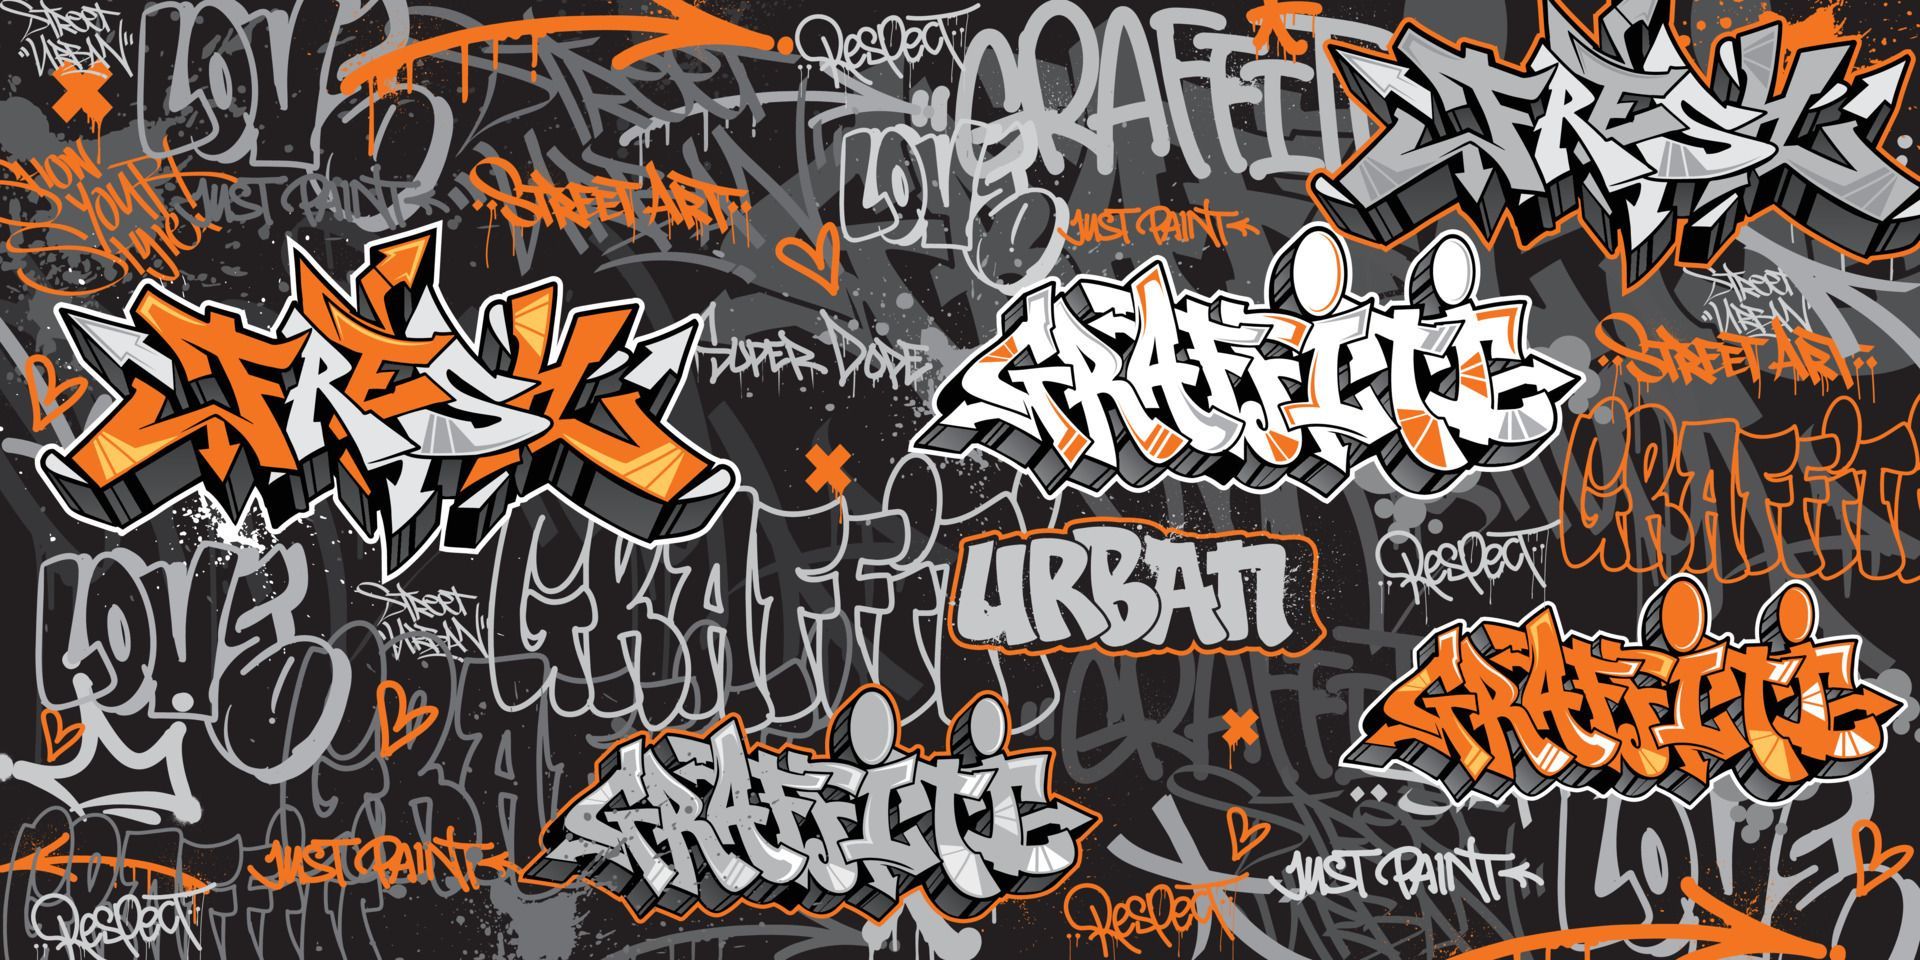 Vector Illustration Of Graffiti Background. Seamless Graffiti Art Textures In A Hand Drawn Style. Old School And Urban Street Art Theme For T Shirt Design, Textile, Background, Wallpaper, And Prints Vector Art At